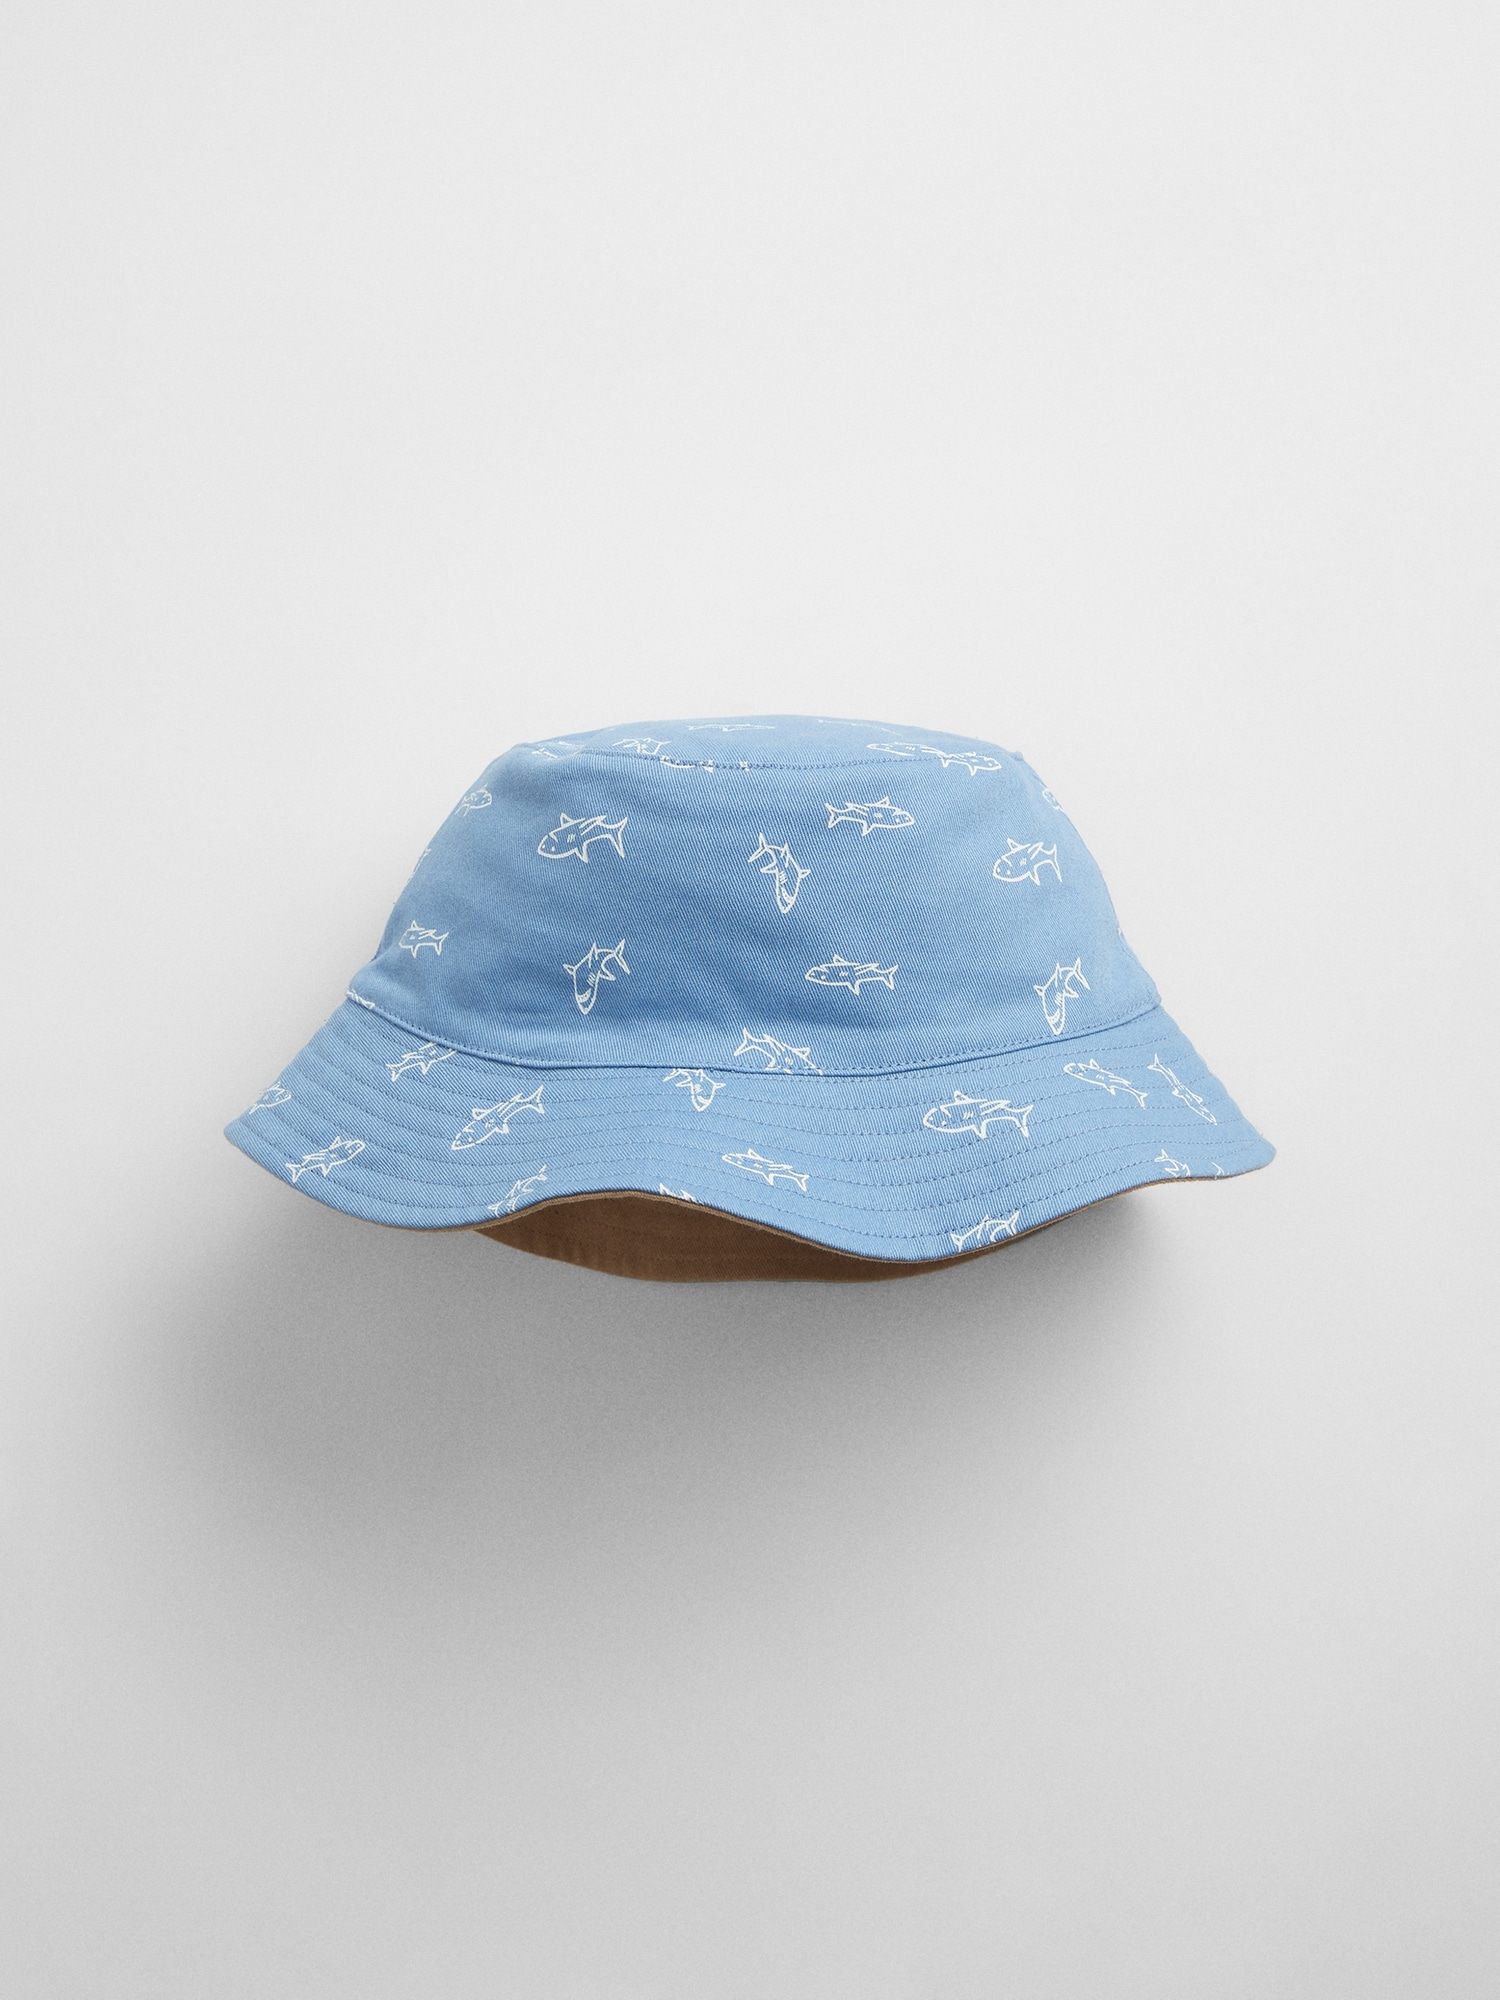 Baby Gap Cloth Cream Off White Beach Fishing Bucket Hat Toddler Size M/L  (as is)